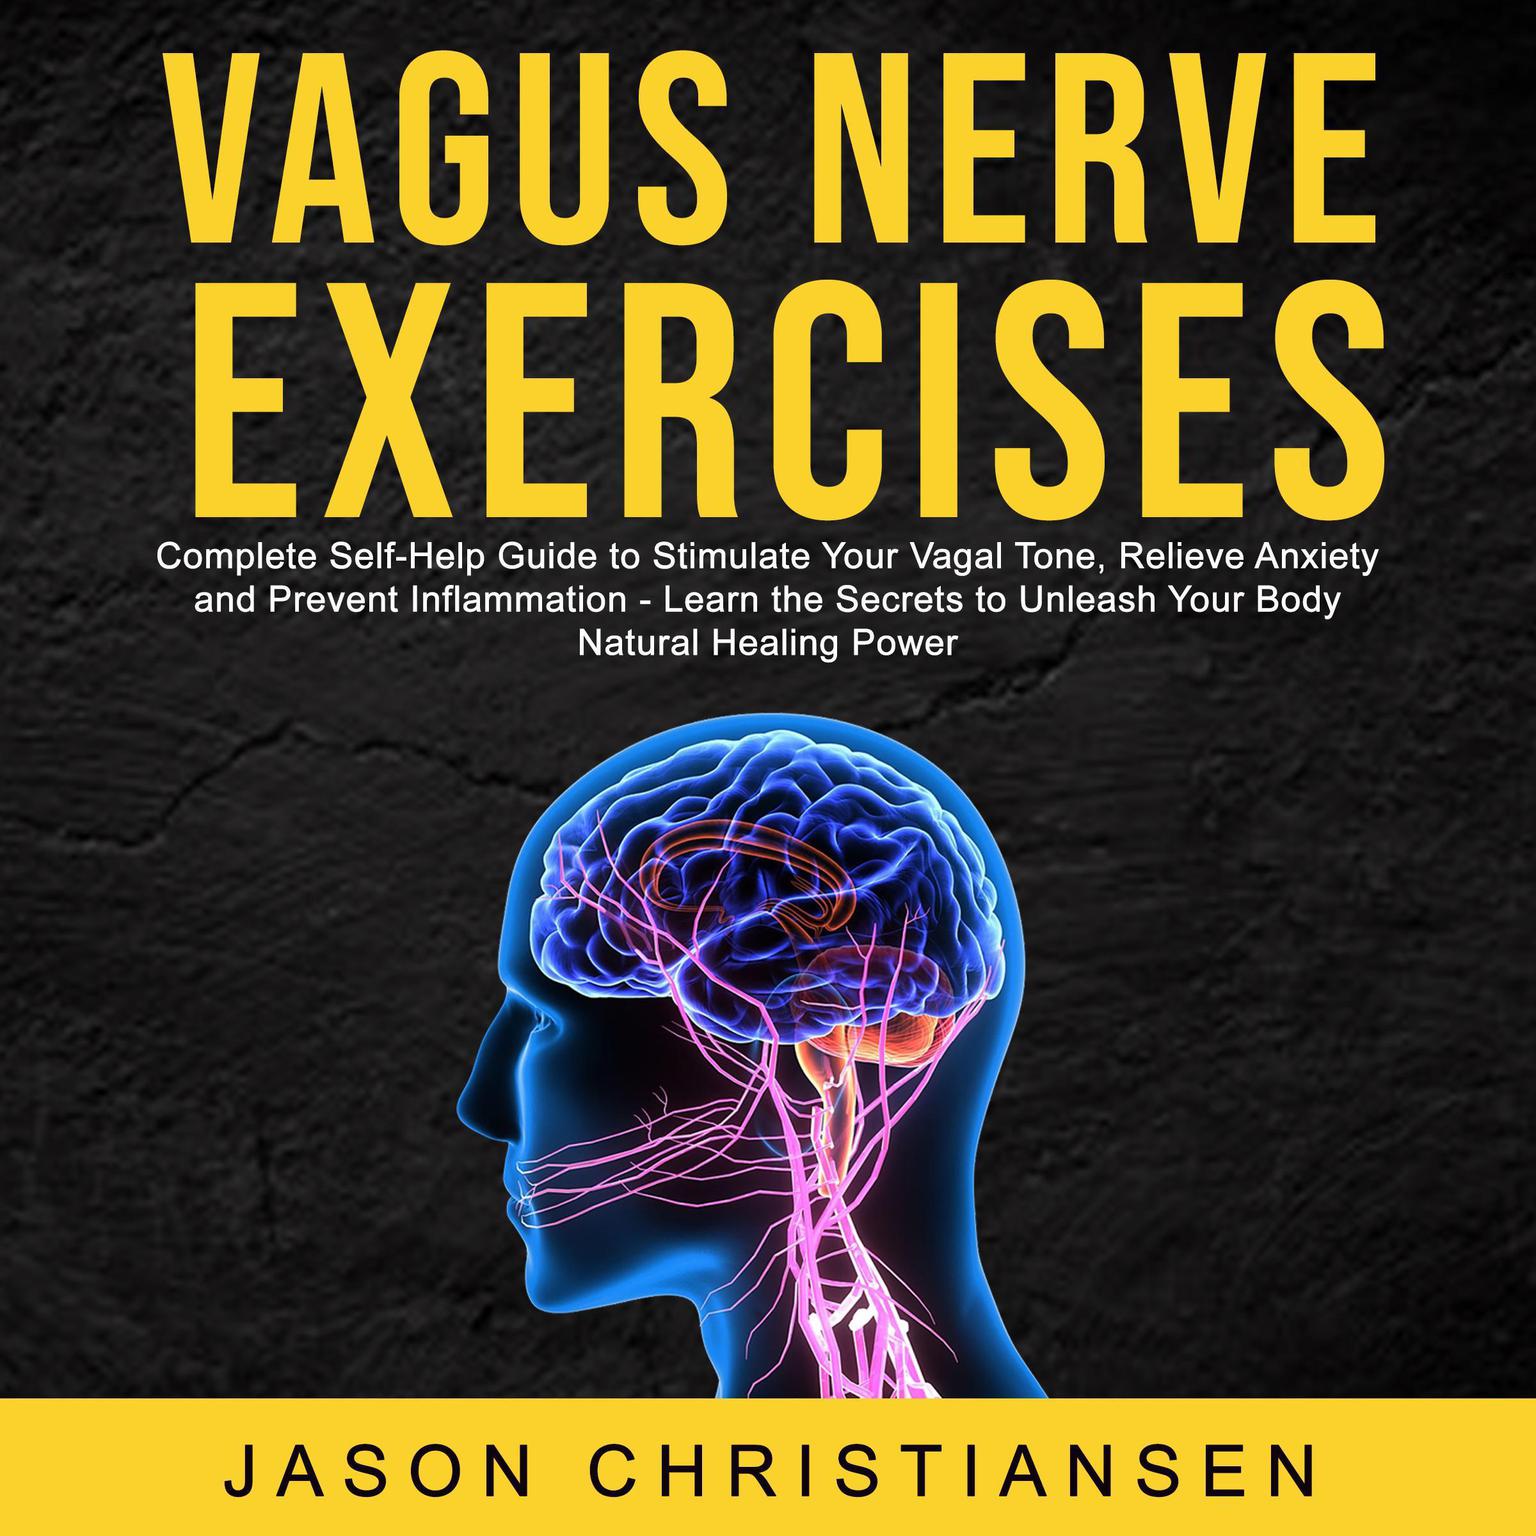 Vagus Nerve Exercises: Complete Self-Help Guide to Stimulate Your Vagal Tone, Relieve Anxiety and Prevent Inflammation - Learn the Secrets to Unleash Your Body Natural Healing Power Audiobook, by Jason Christiansen